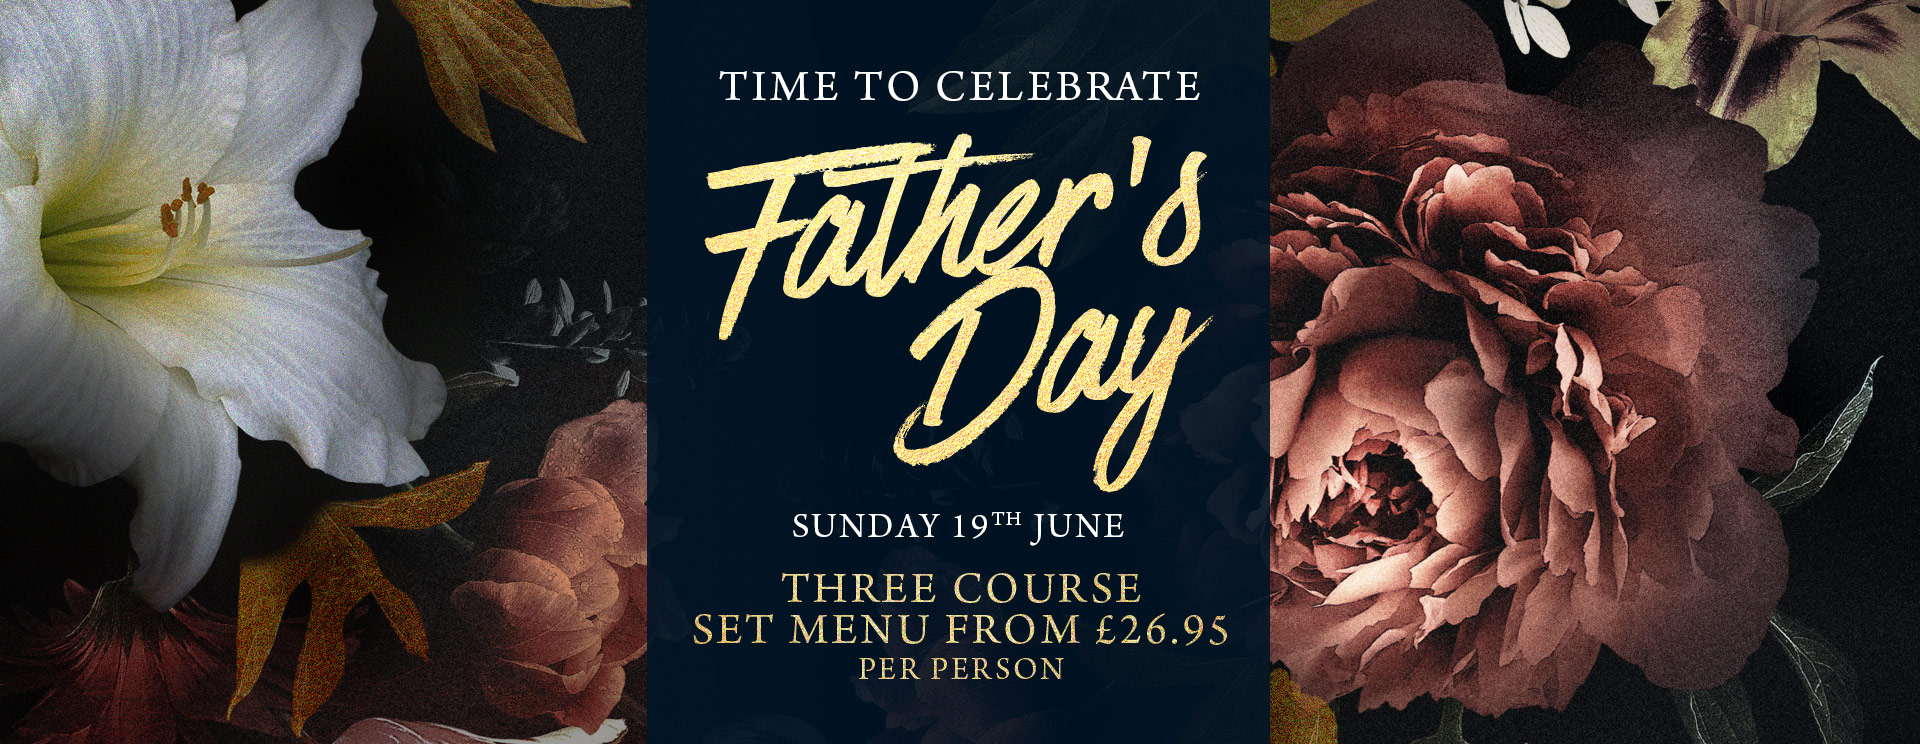 Fathers Day at The Rambler's Rest